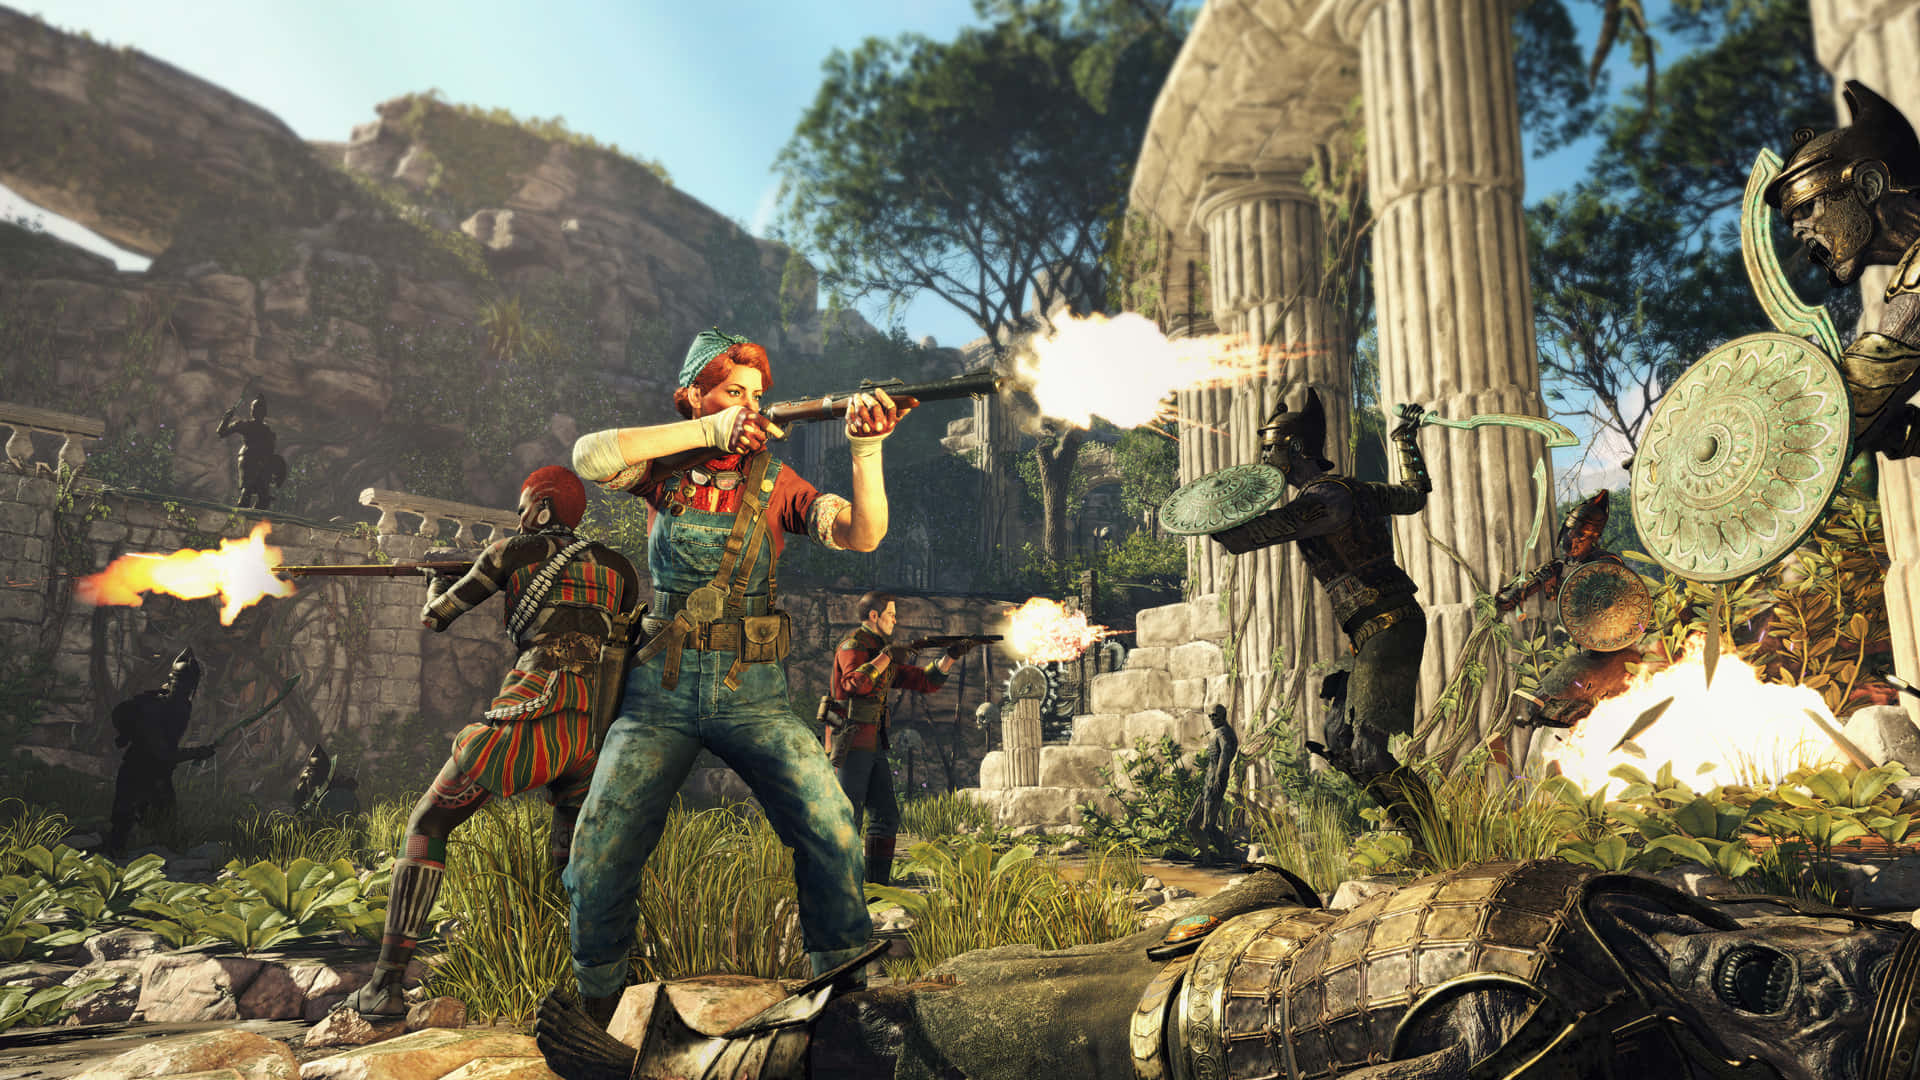 "Explore an exotic world filled with epic adventure in Strange Brigade!"